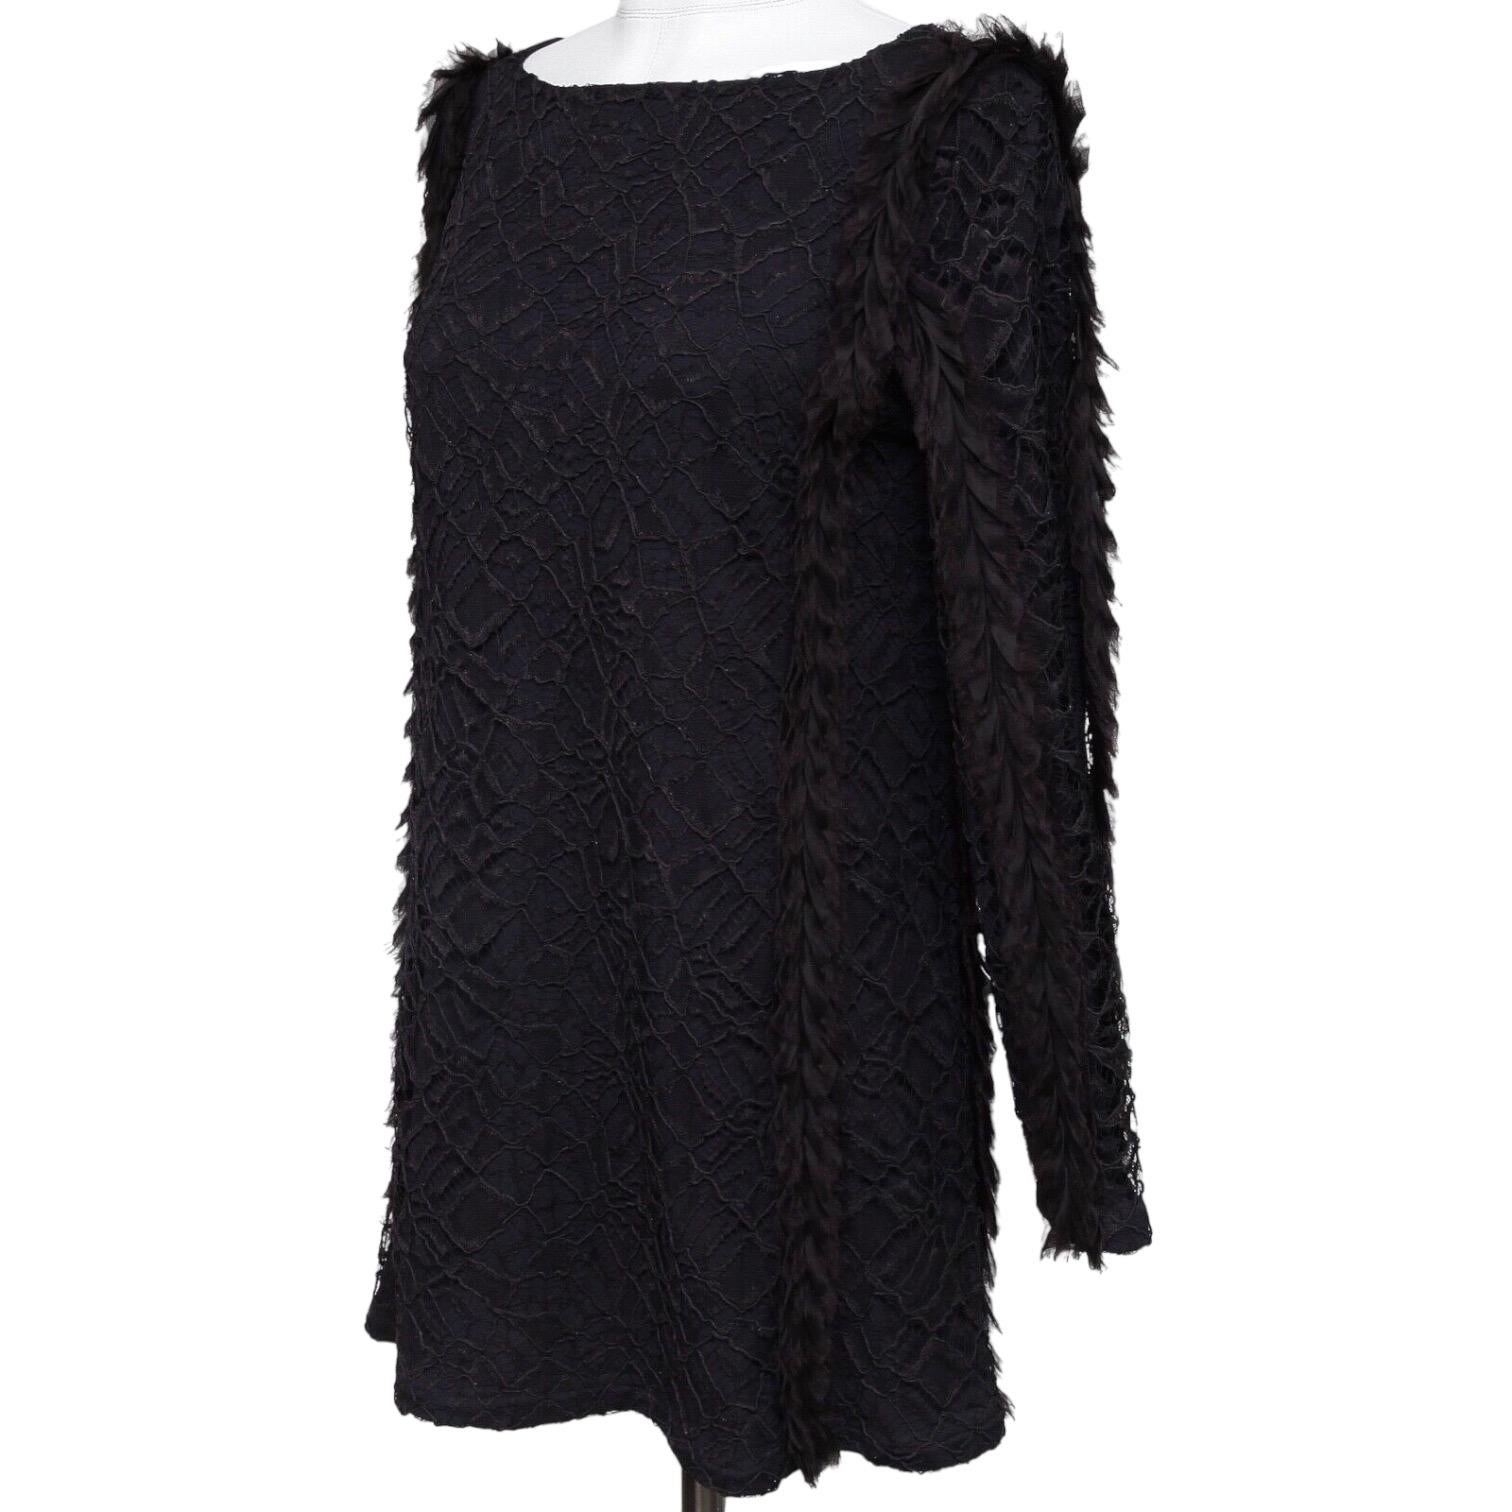 CHANEL Lace Dress Mini Purple Long Sleeve Gripoix Sz 38 Fall 2012 In Excellent Condition For Sale In Hollywood, FL